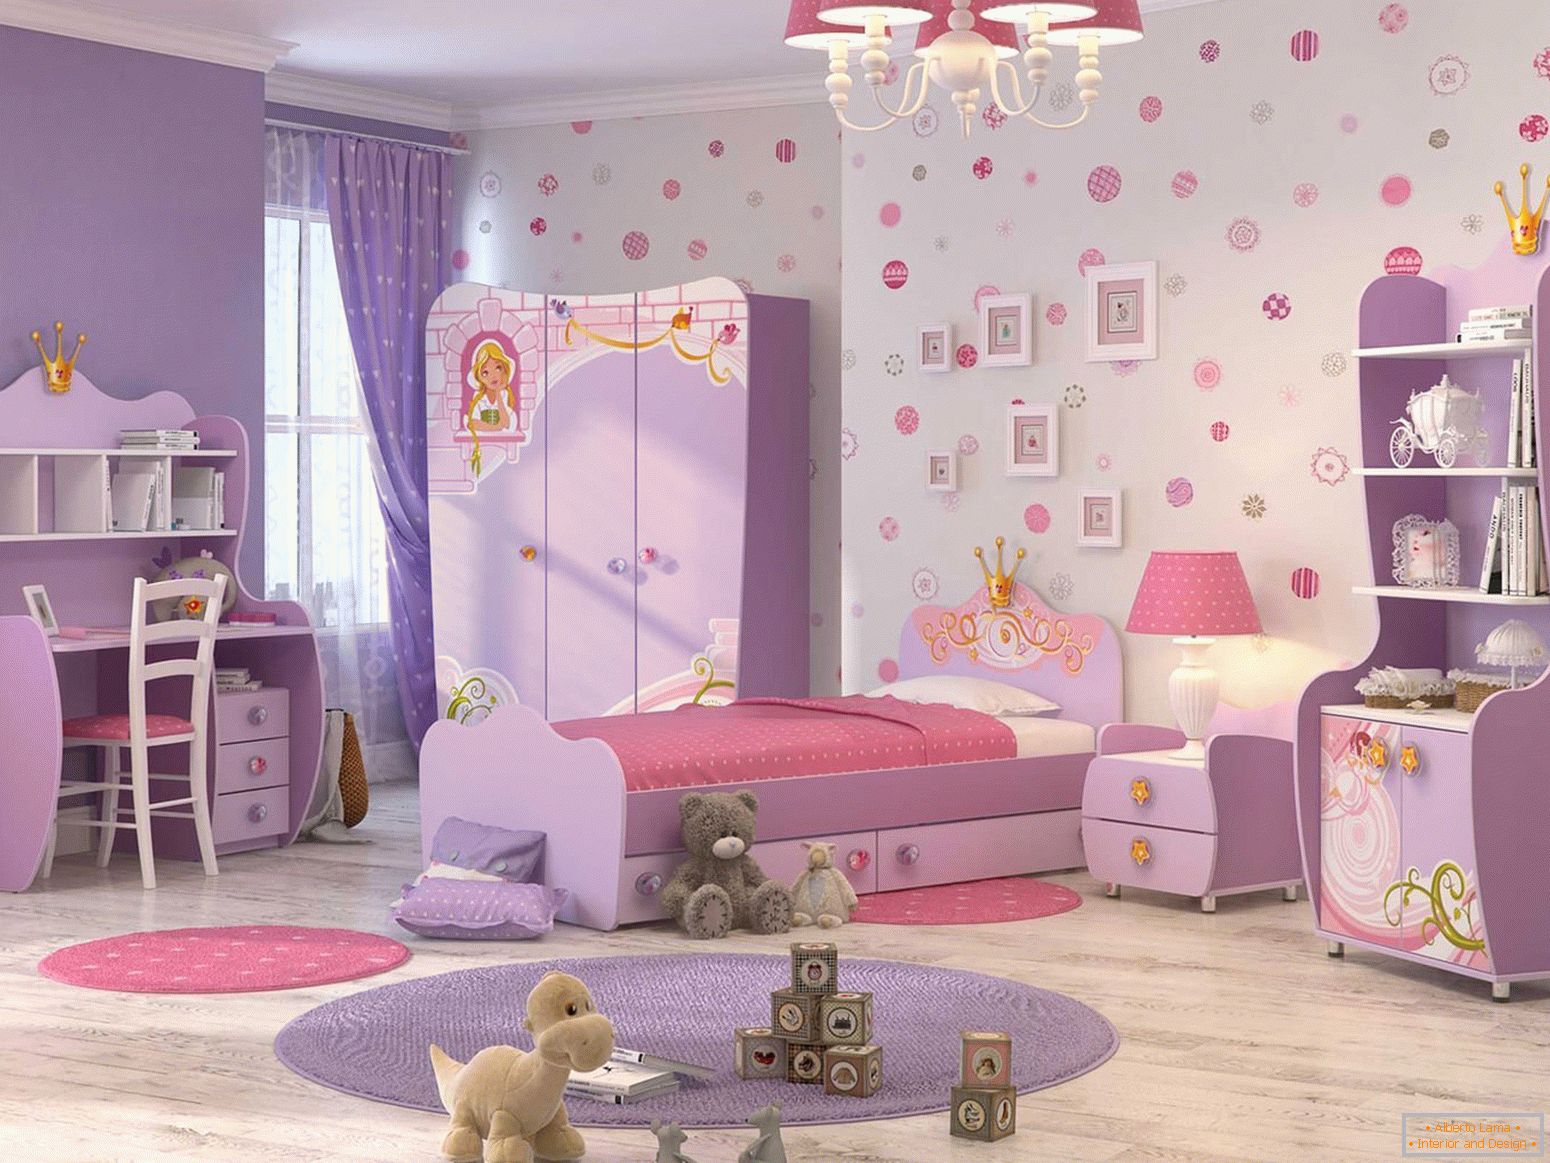 Purple and pink in the design of the nursery